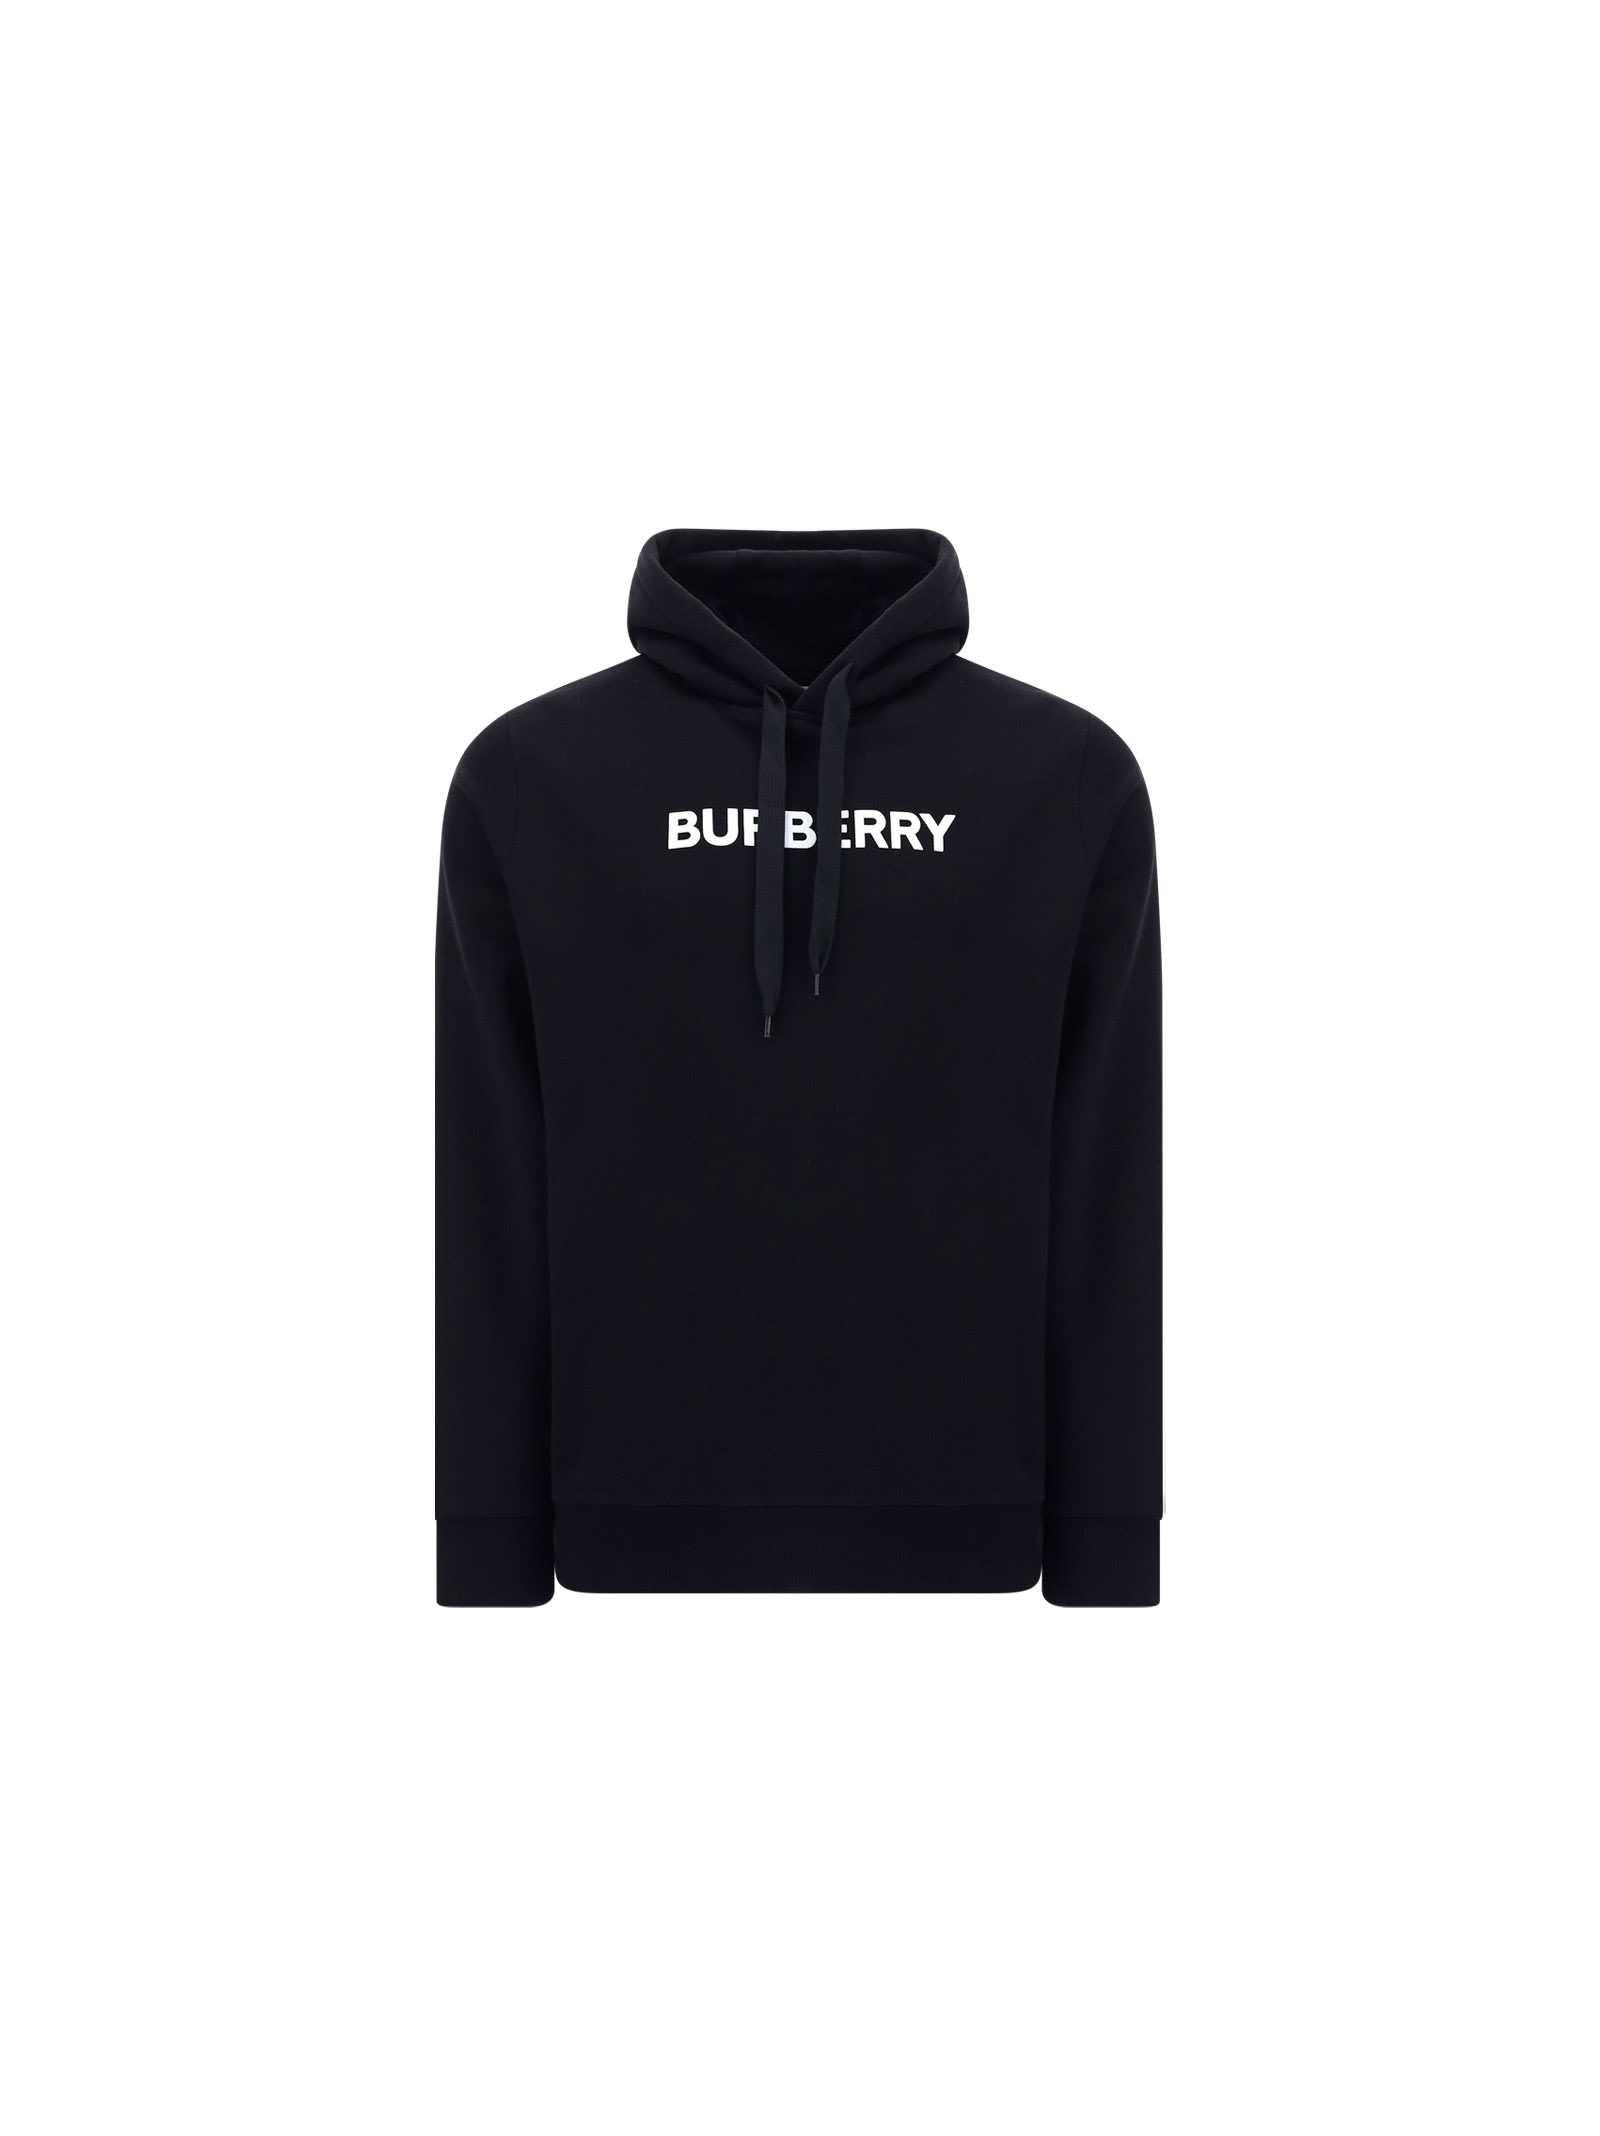 Burberry Ansdell Hoodie